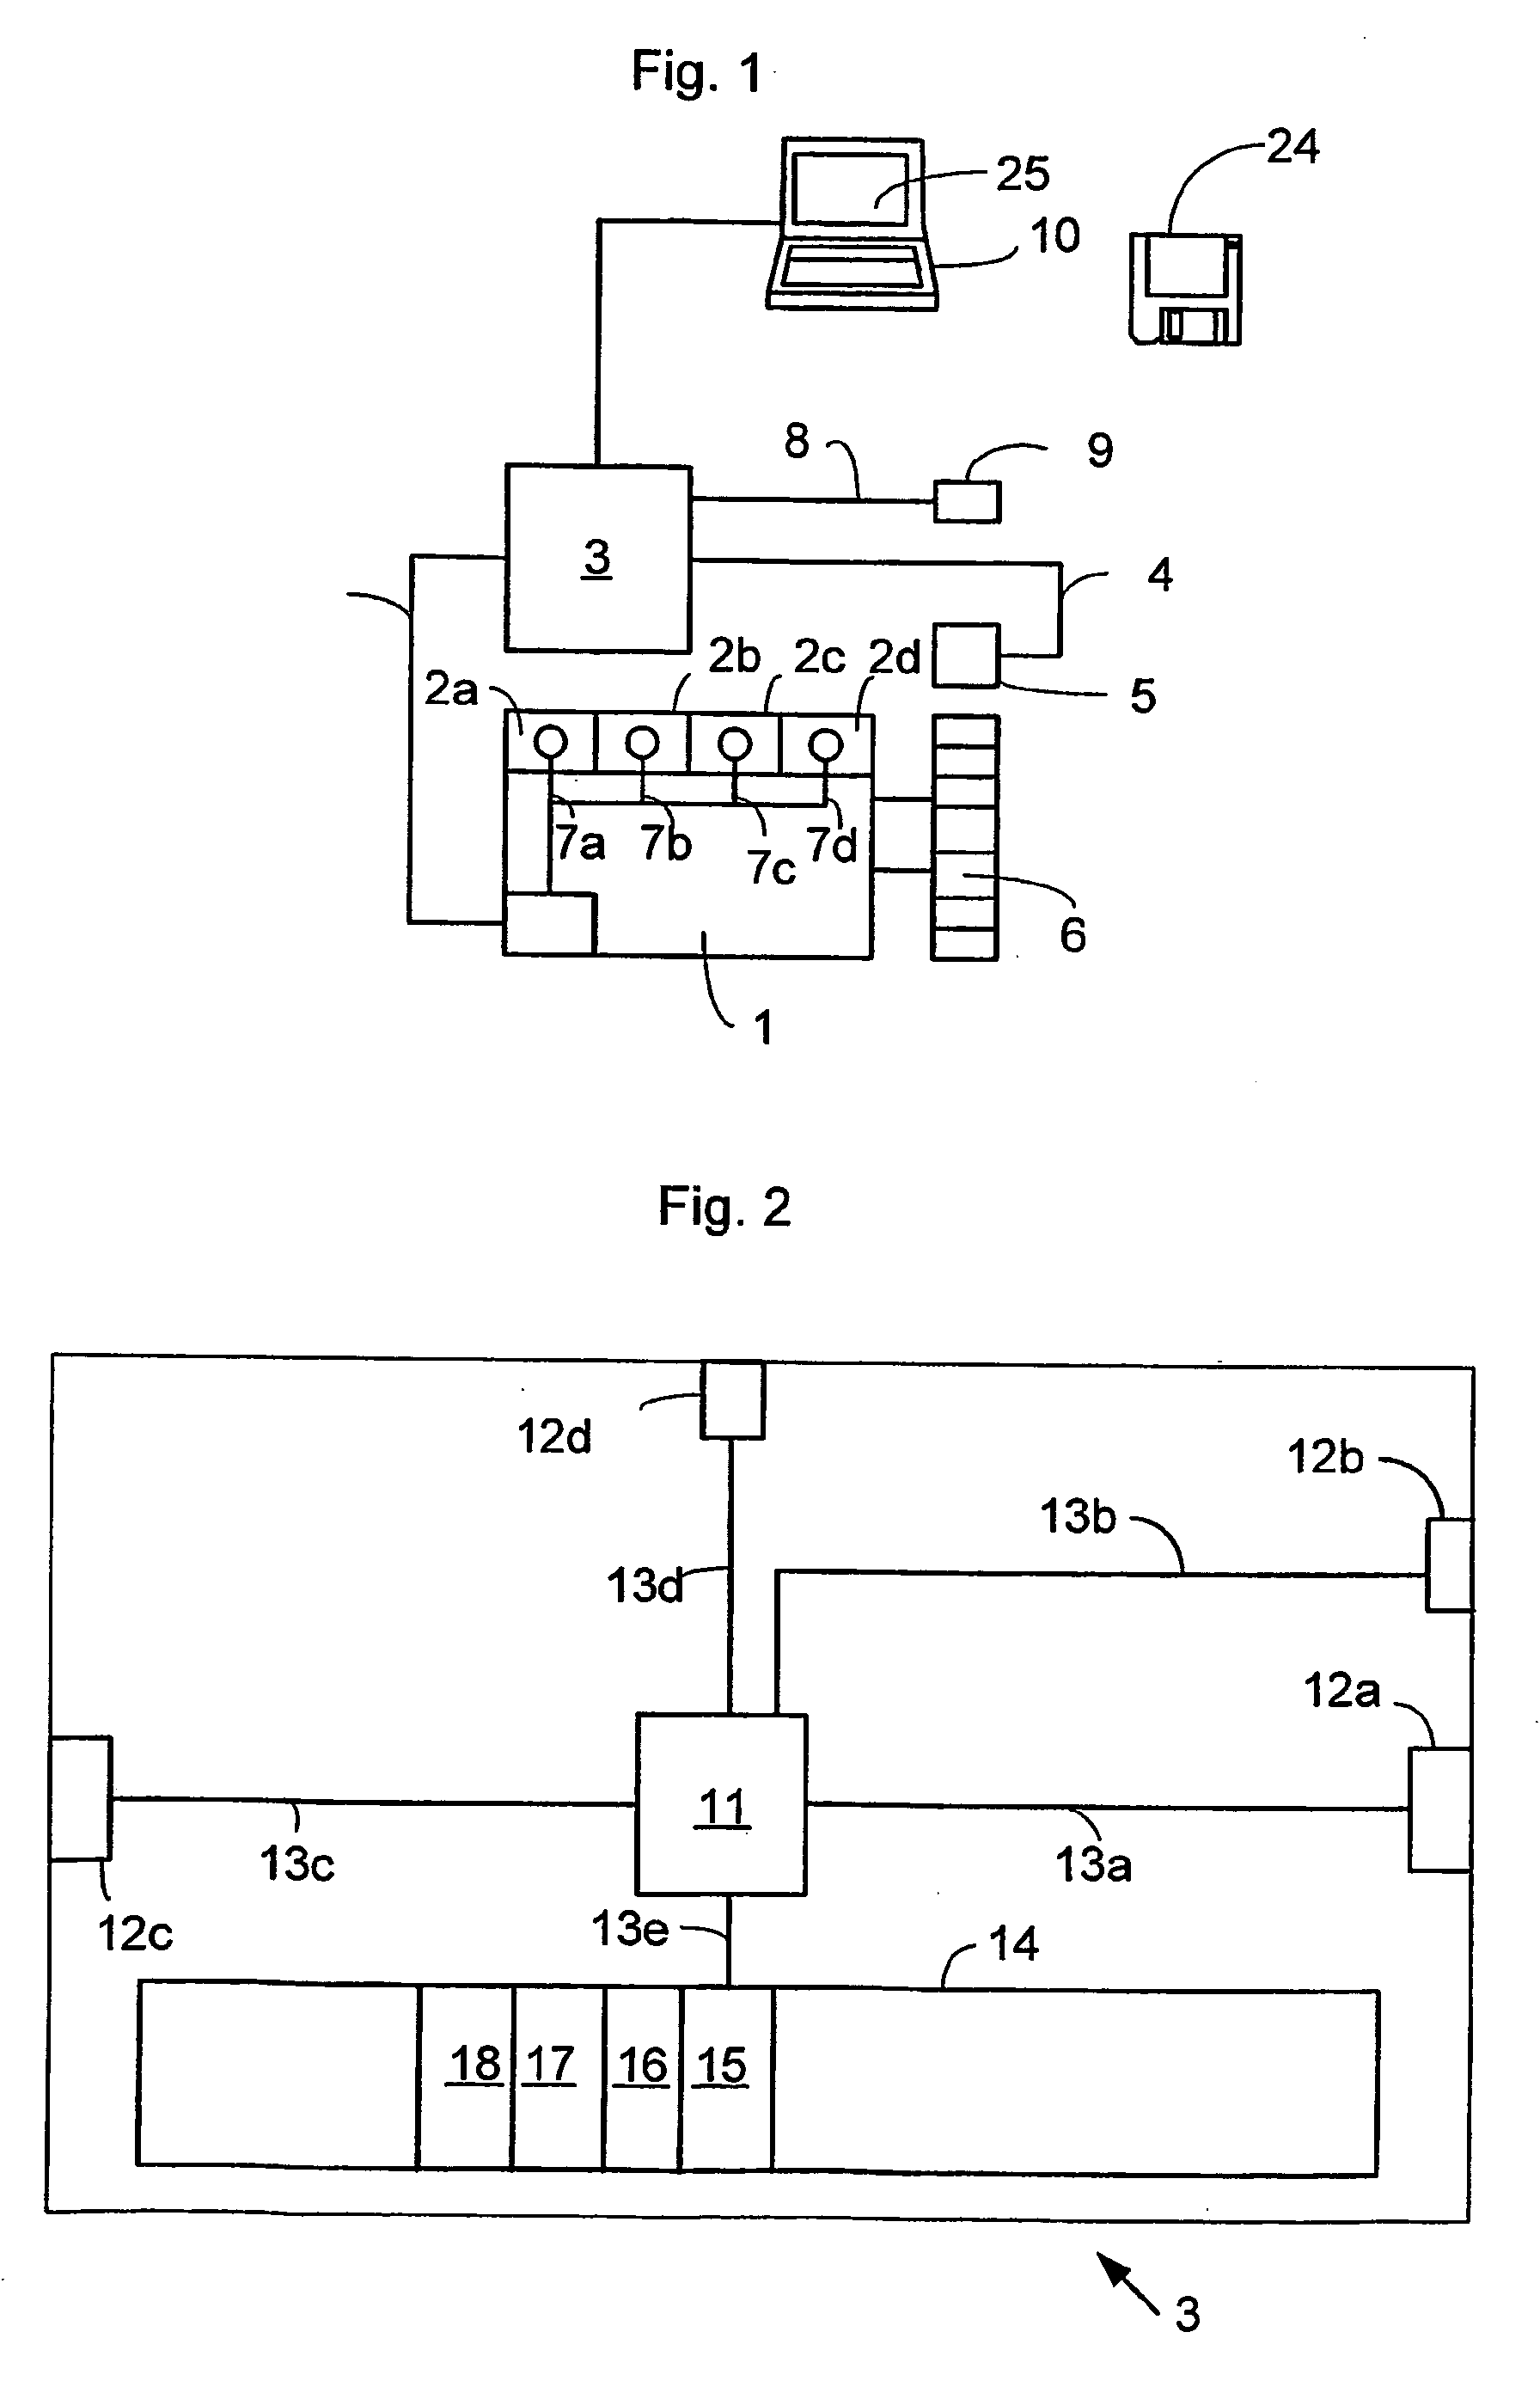 Method and computer program for identifying a fault in an engine